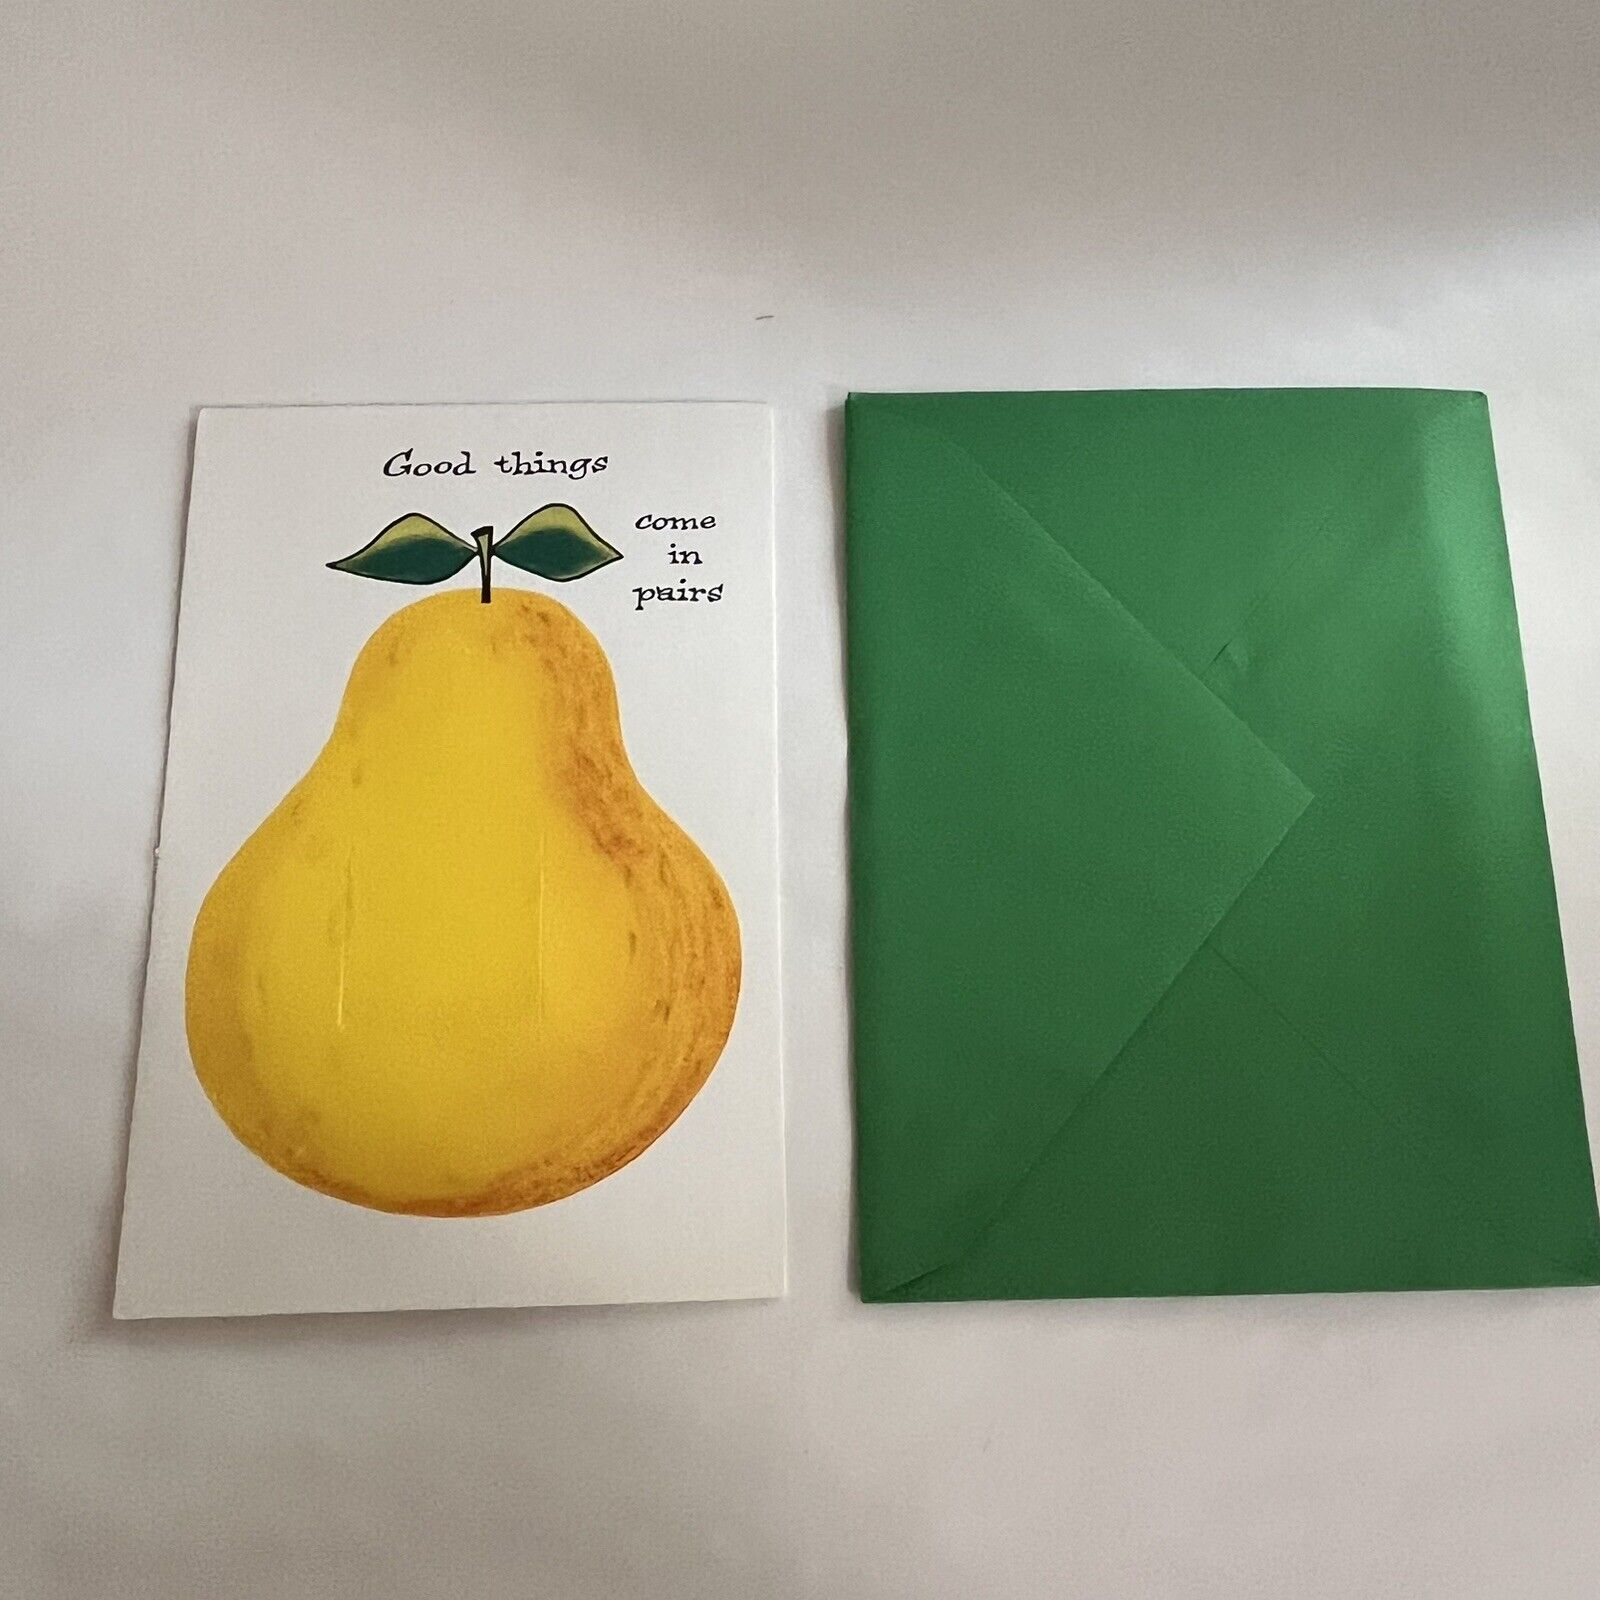 VTG Anniversary Card “Good Things Come In Pairs” By Fravessi USA 1960s Fruit